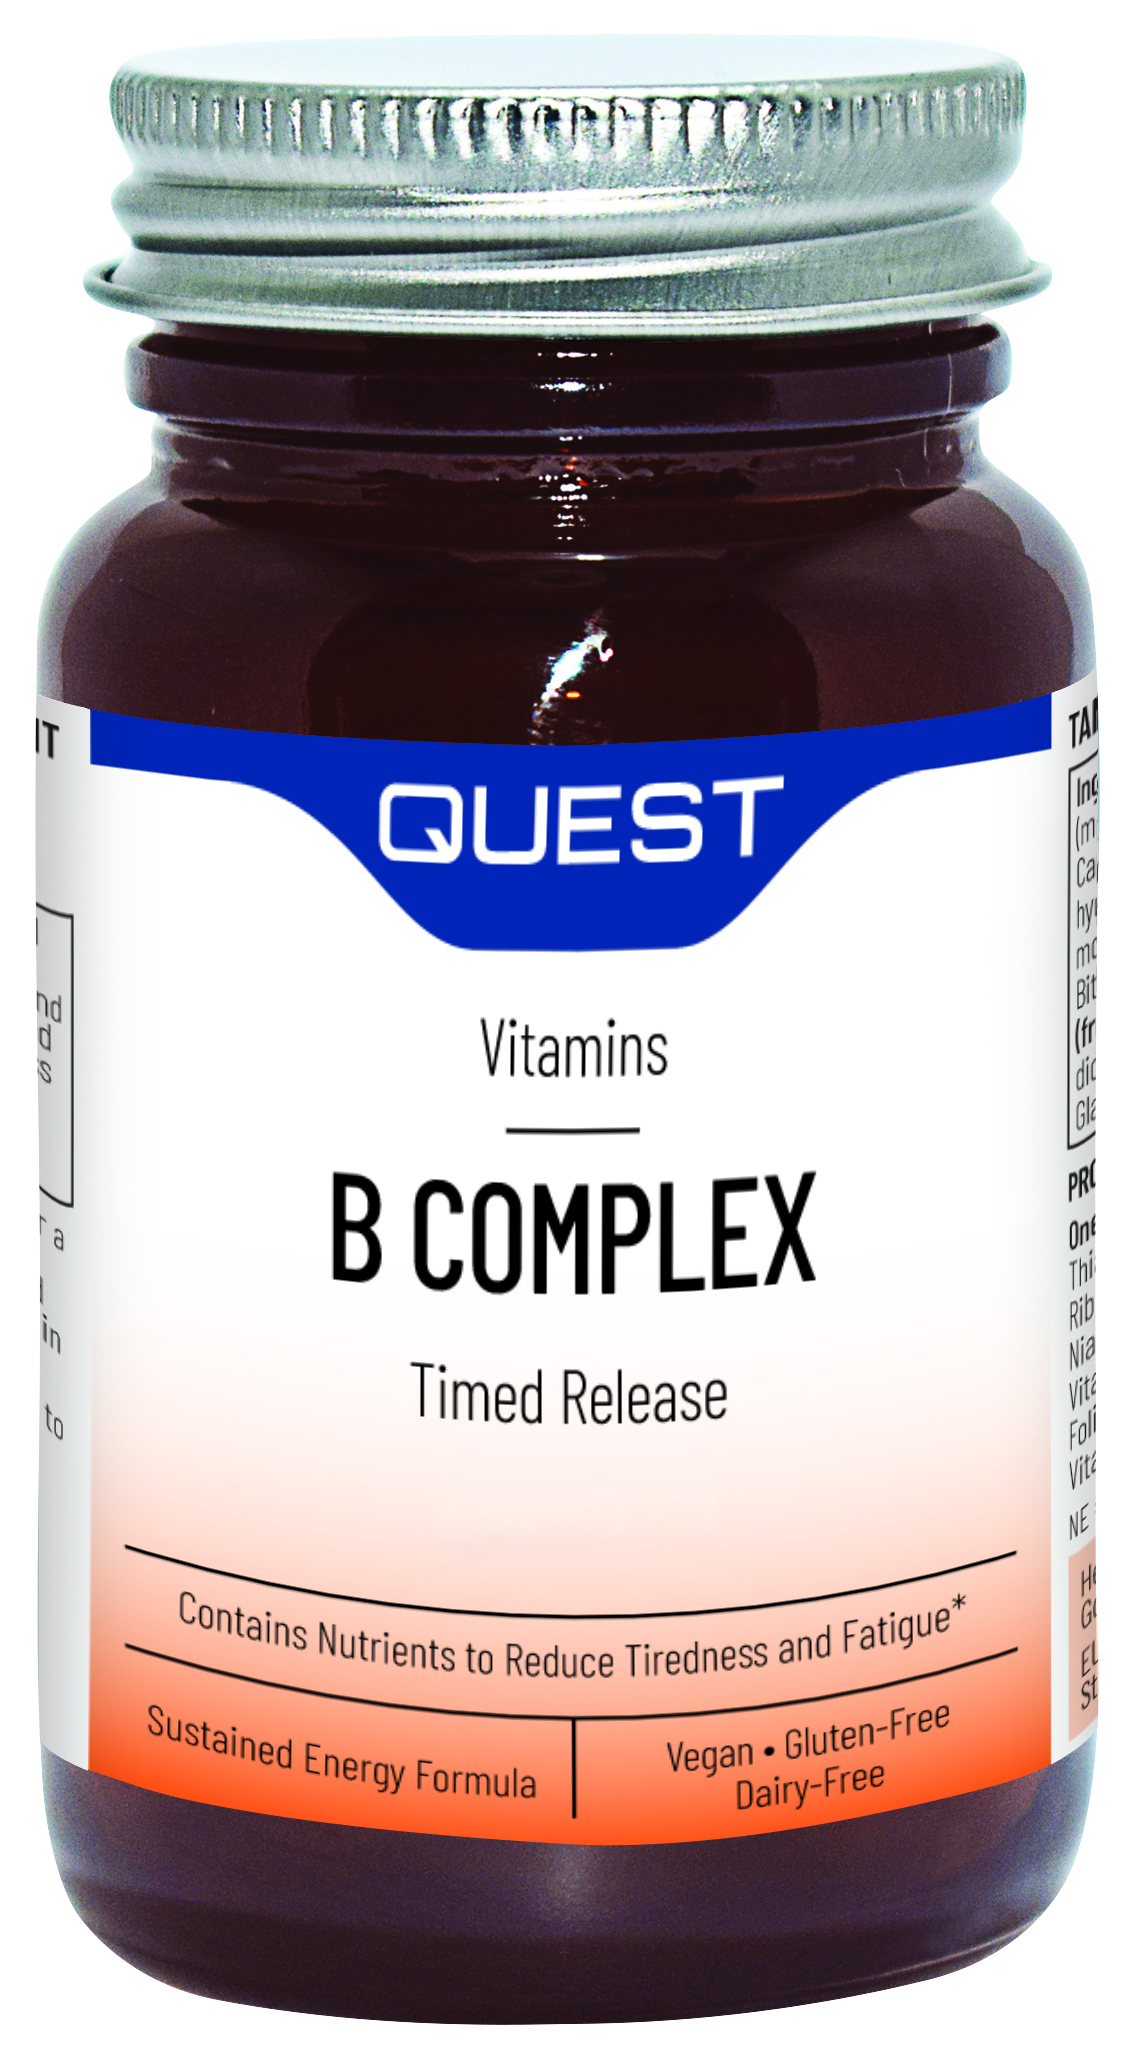 B complex Timed Release